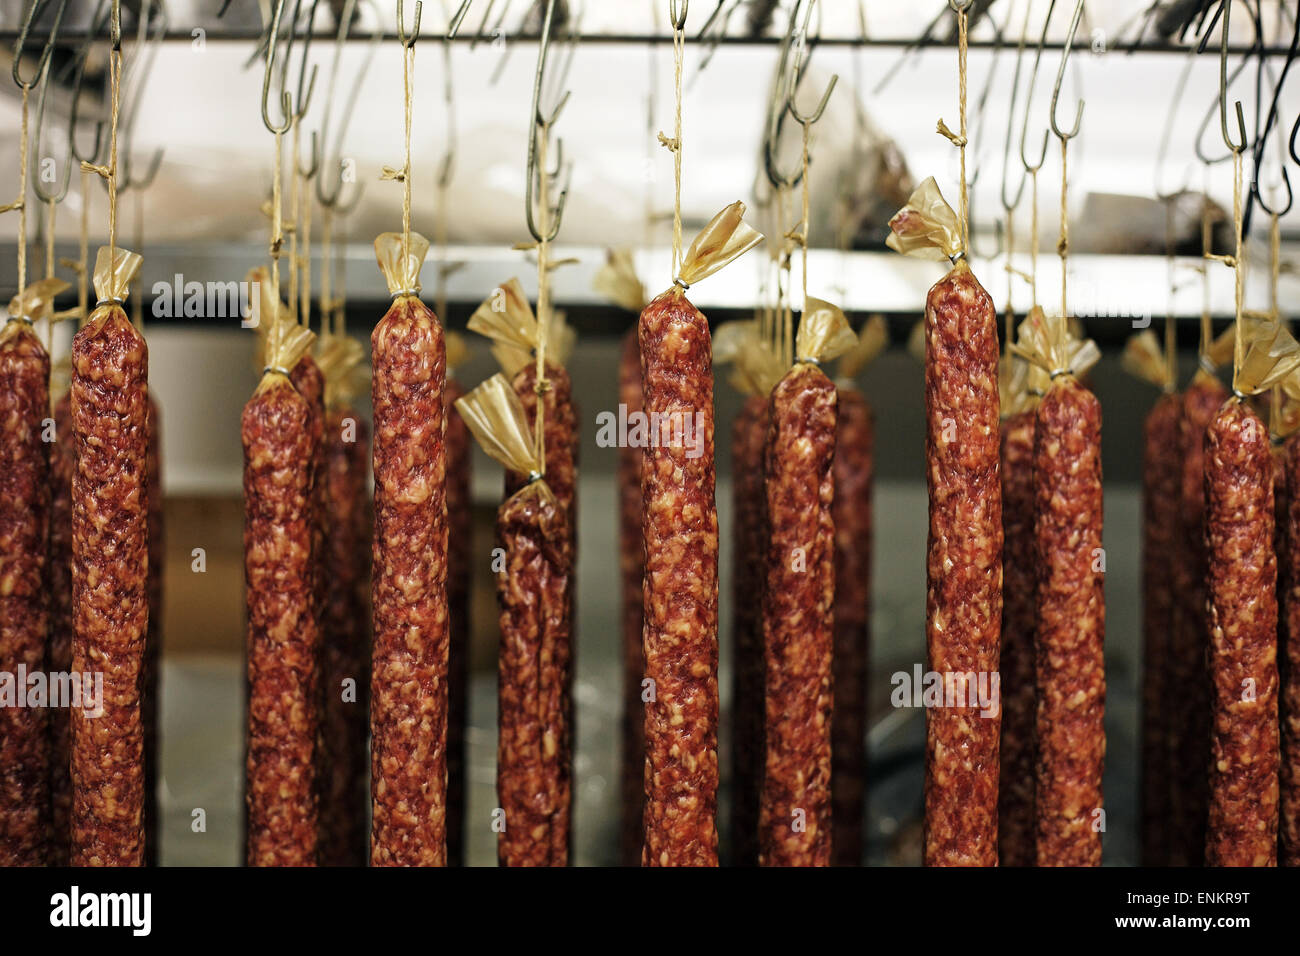 Salami hanging to cure. Stock Photo